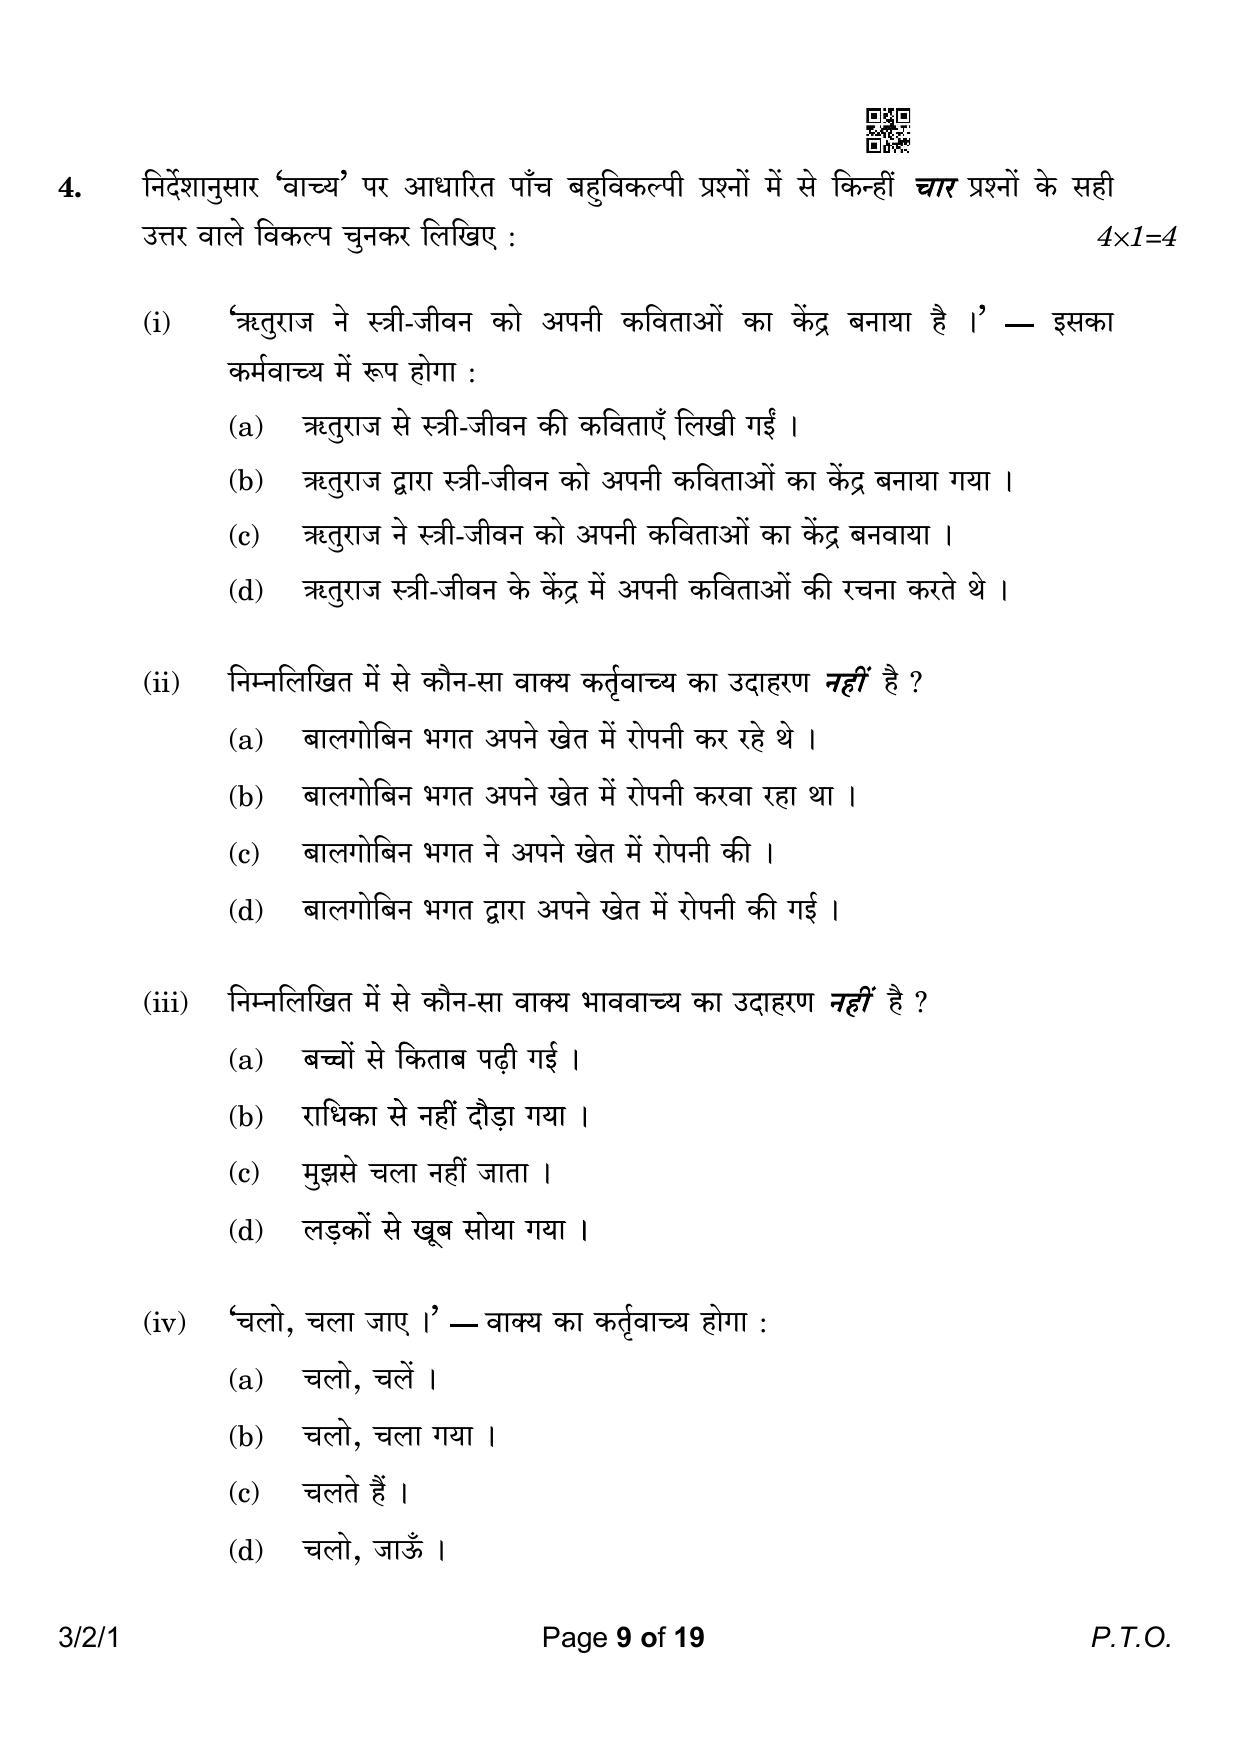 CBSE Class 10 3-2-1 Hindi A 2023 Question Paper - Page 9